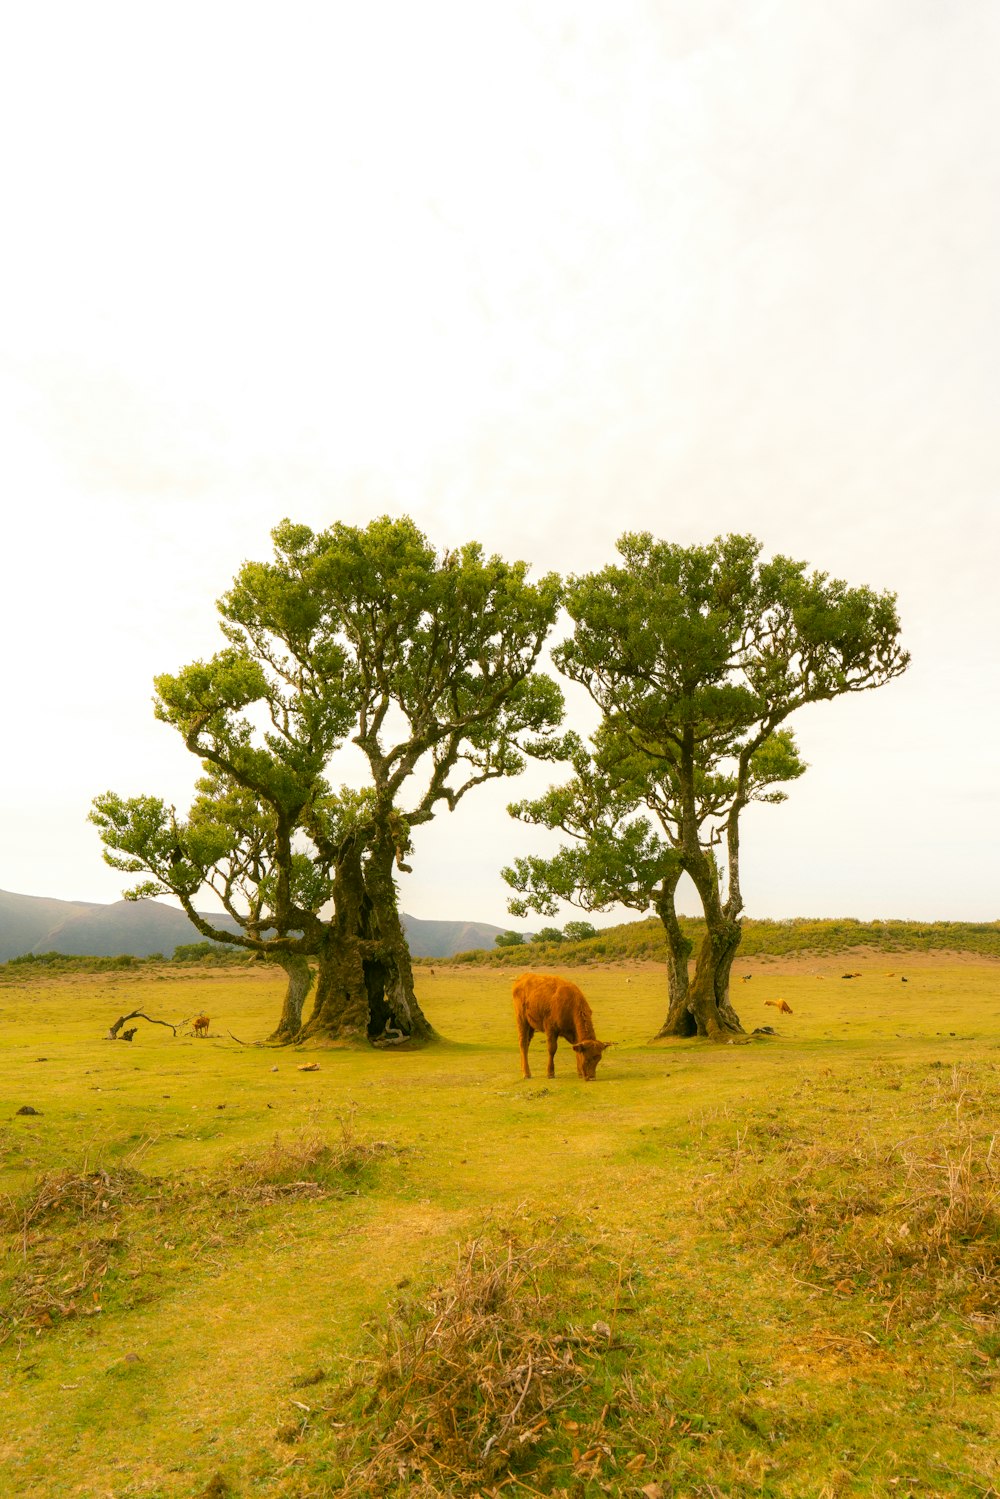 a brown horse standing next to a couple of trees